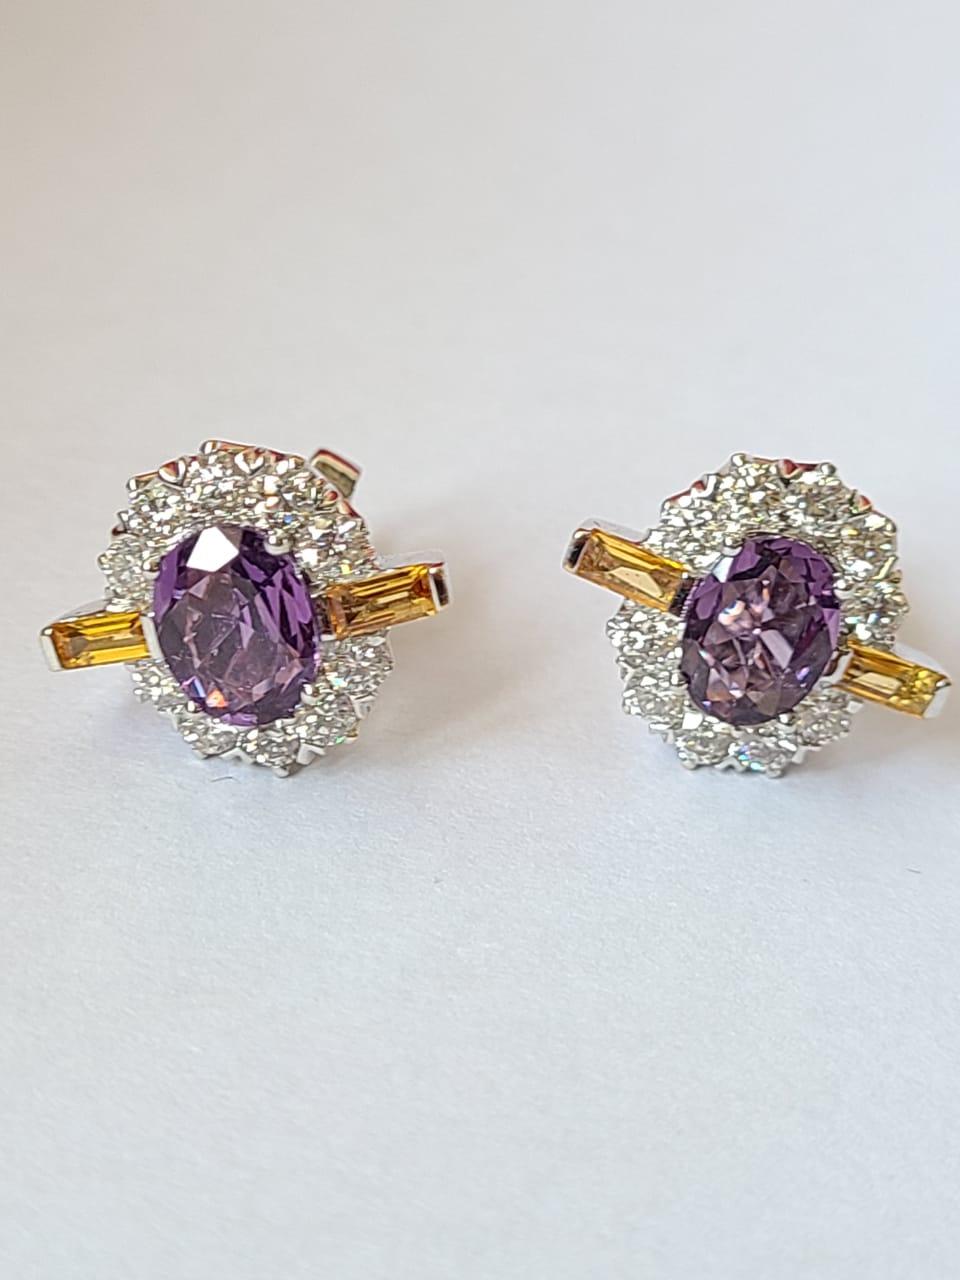 A very gorgeous and beautiful Purple Sapphires & Yellow Sapphires set in 18K White Gold & Diamonds. The weight of the Purple Sapphires is 2.31 carats. The Purple Sapphires are of Ceylon origin. The weight of the Yellow Sapphires Baguettes is 0.45